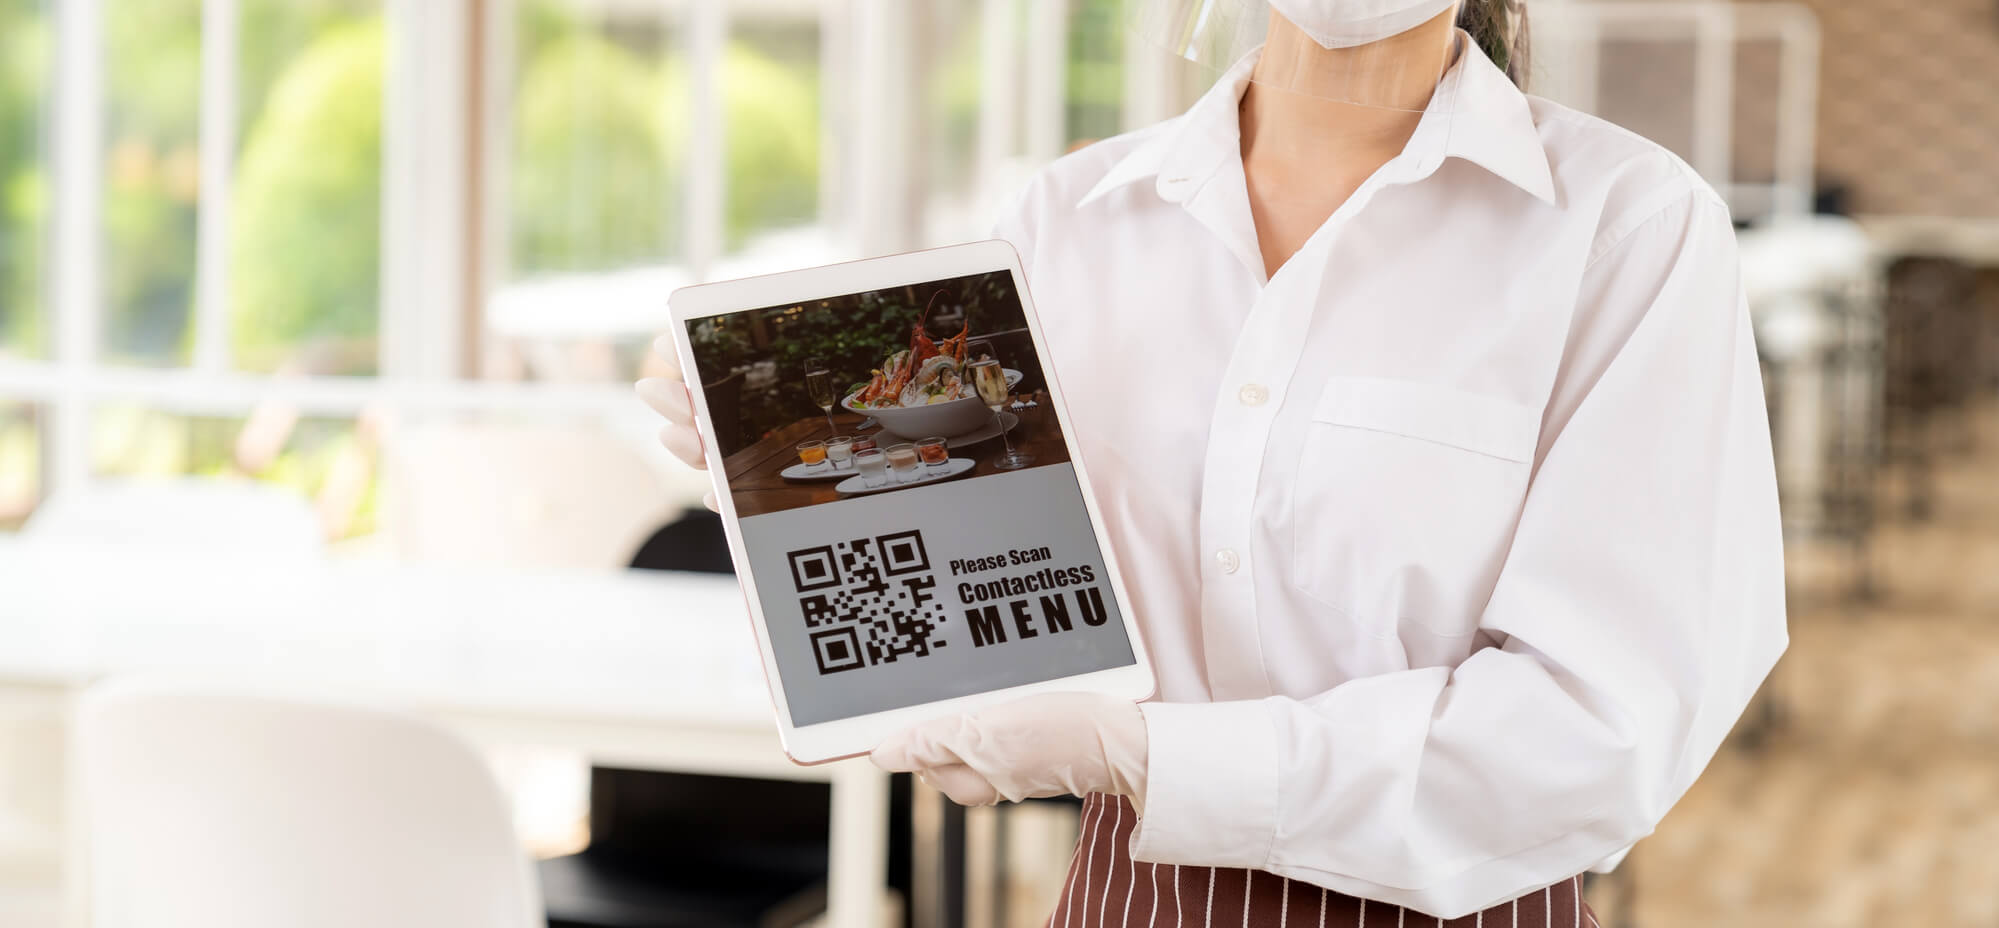 Restaurant post-covid Strategies example, waiter displaying a contactless menu